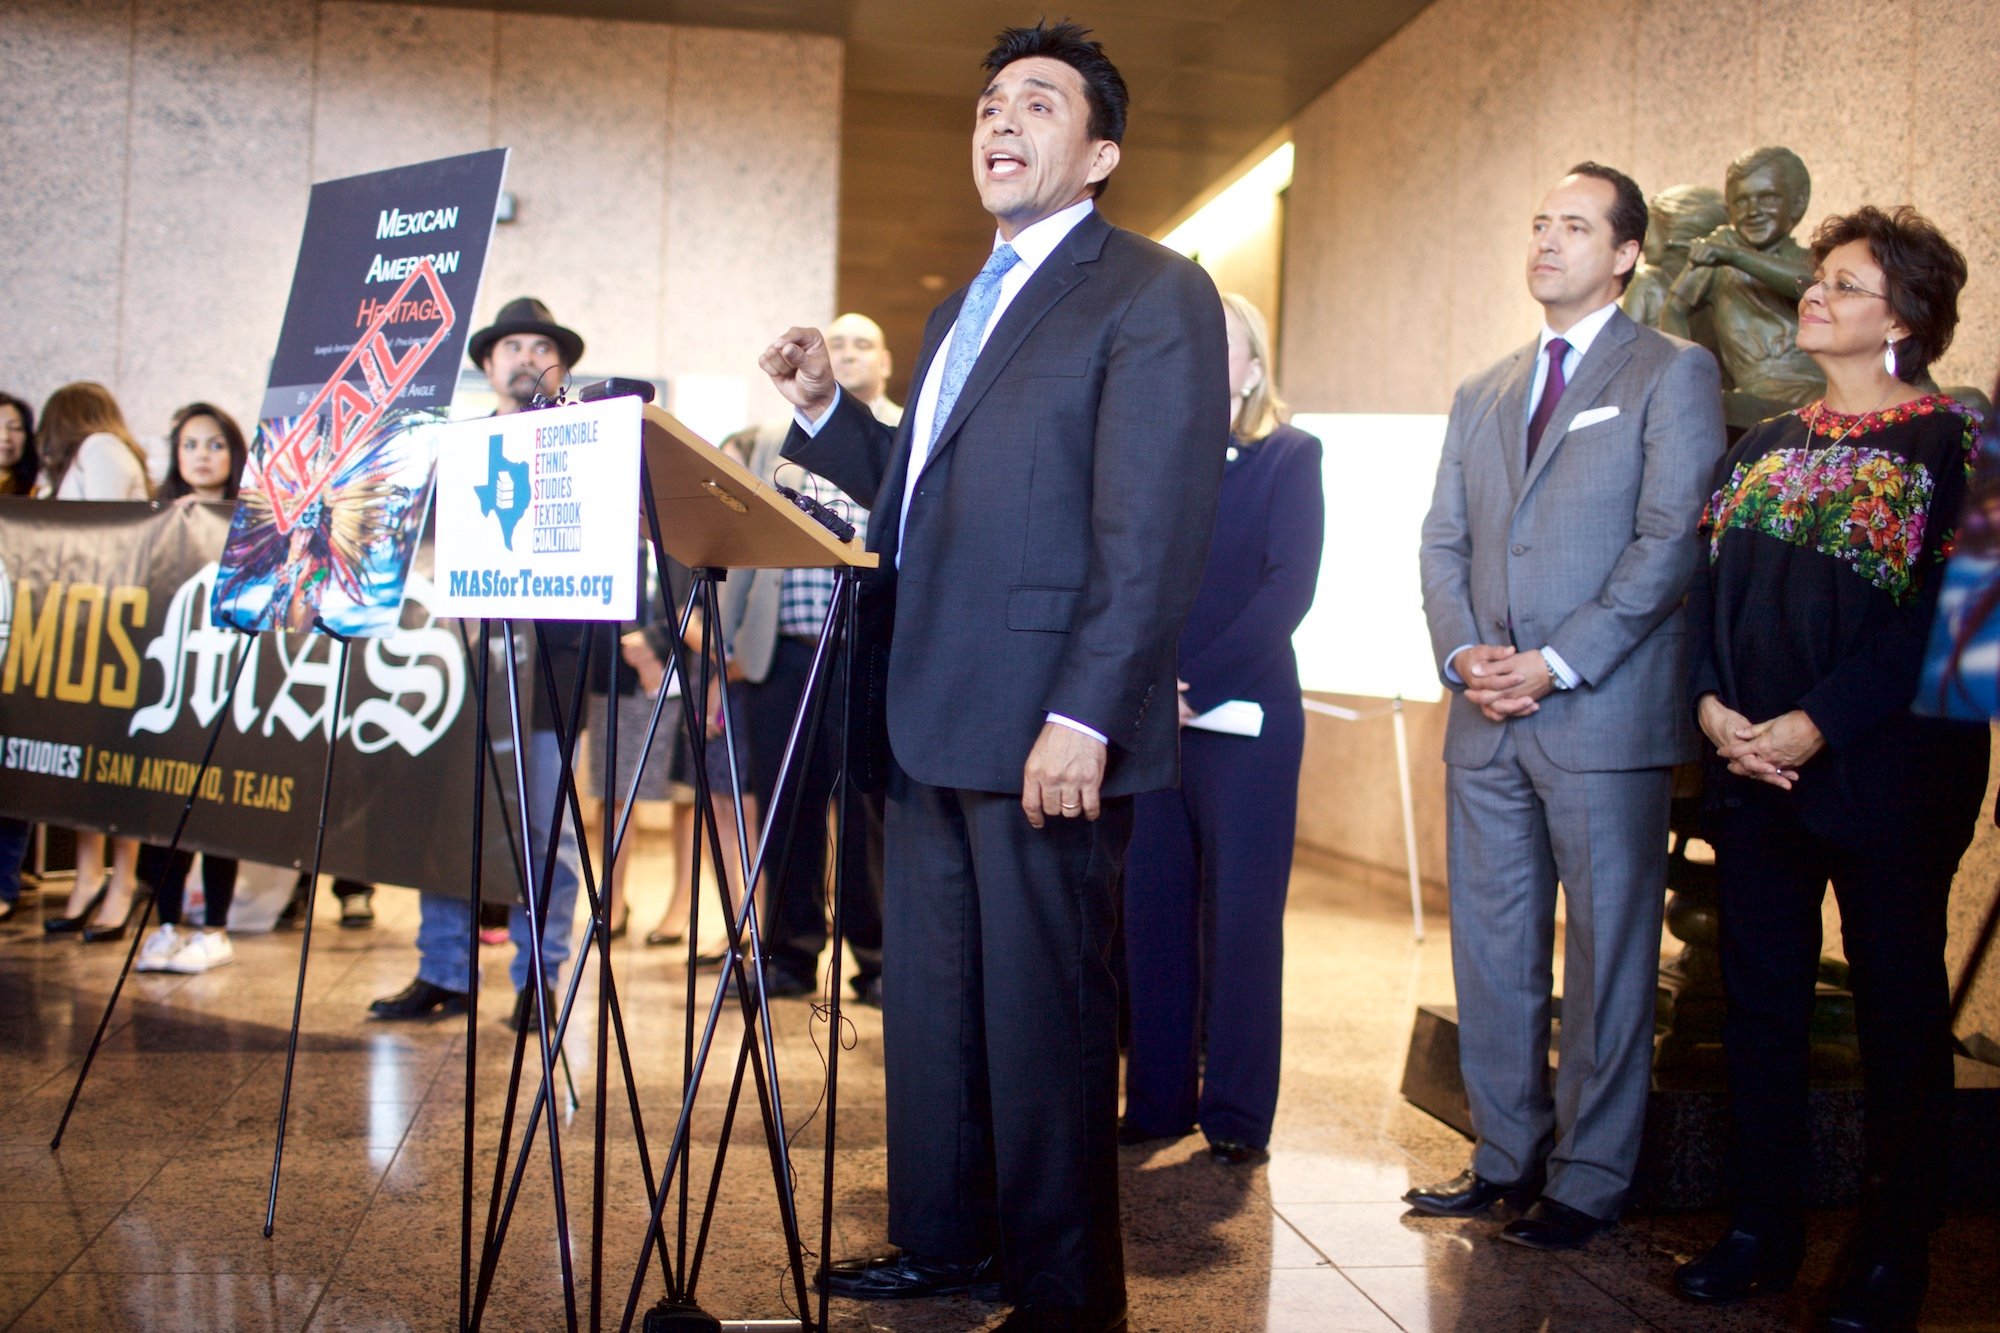 Houston author and activist Tony Diaz speaks against the textbook "Mexican American Heritage" at a press conference at the Texas Education Agency.